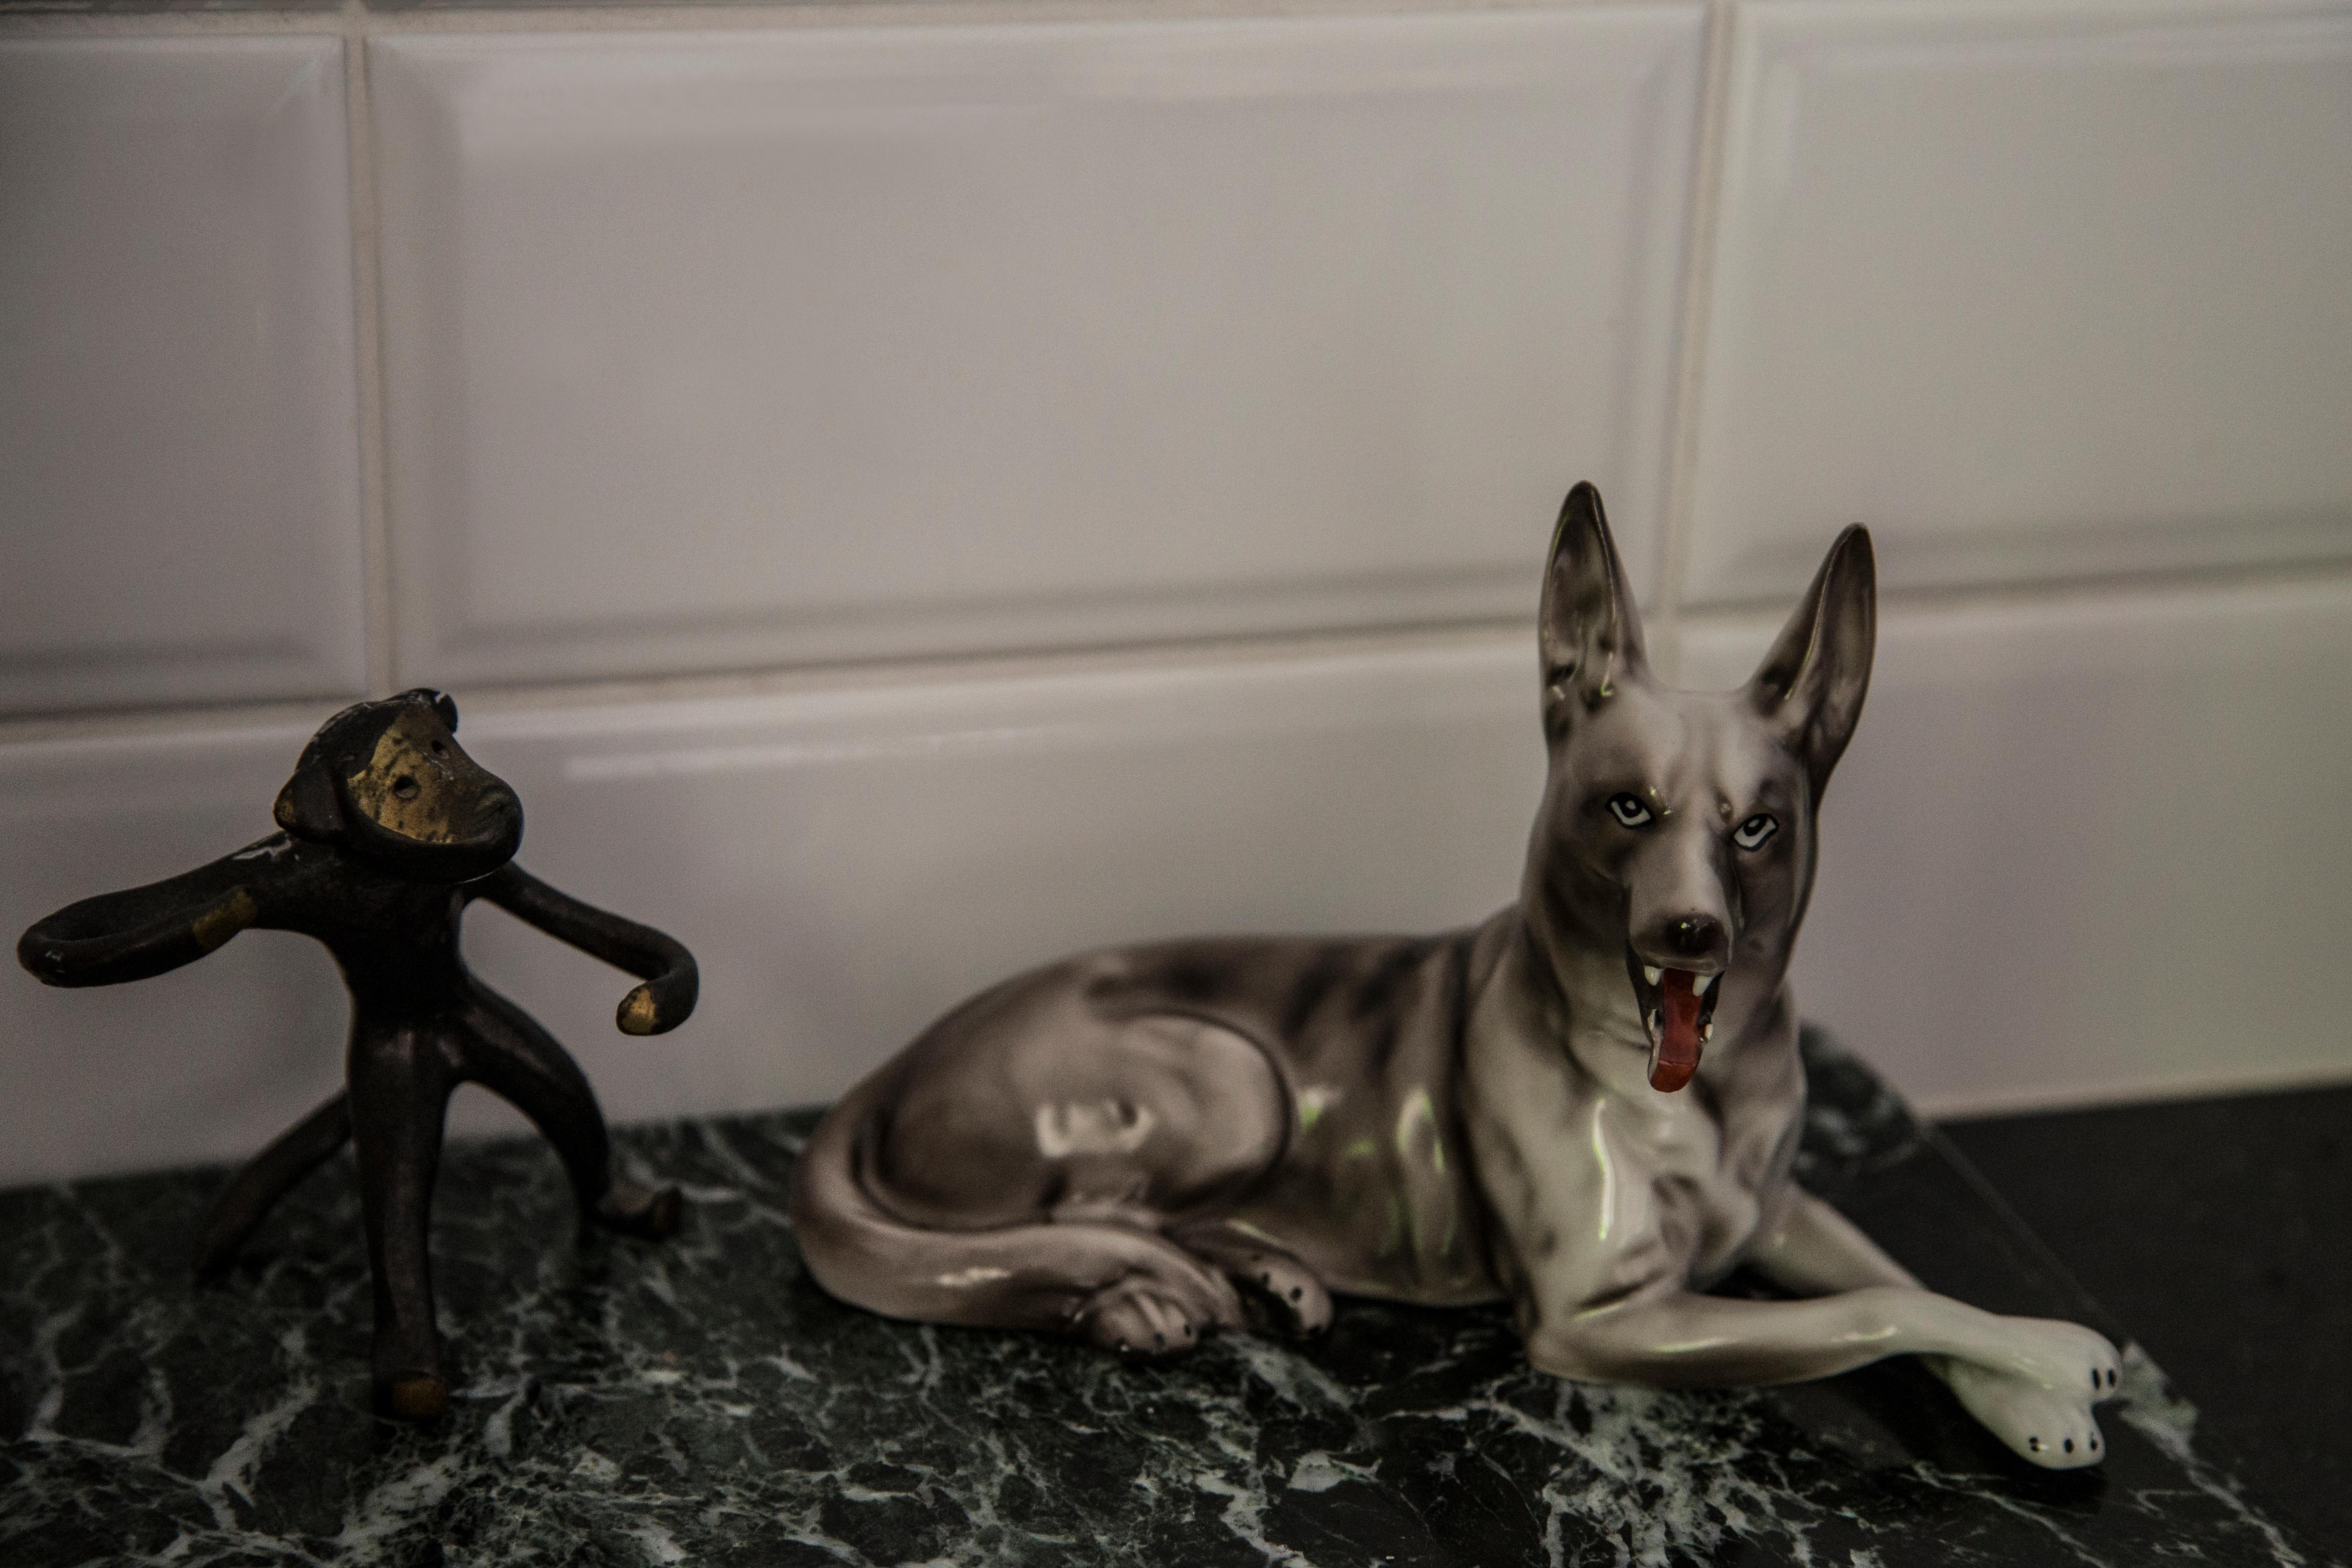 Painted ceramic, very good original vintage condition. No damages or cracks. Beautiful and unique decorative sculpture. Gray Shepherd Dog Sculpture was produced in England. Only one dog available.